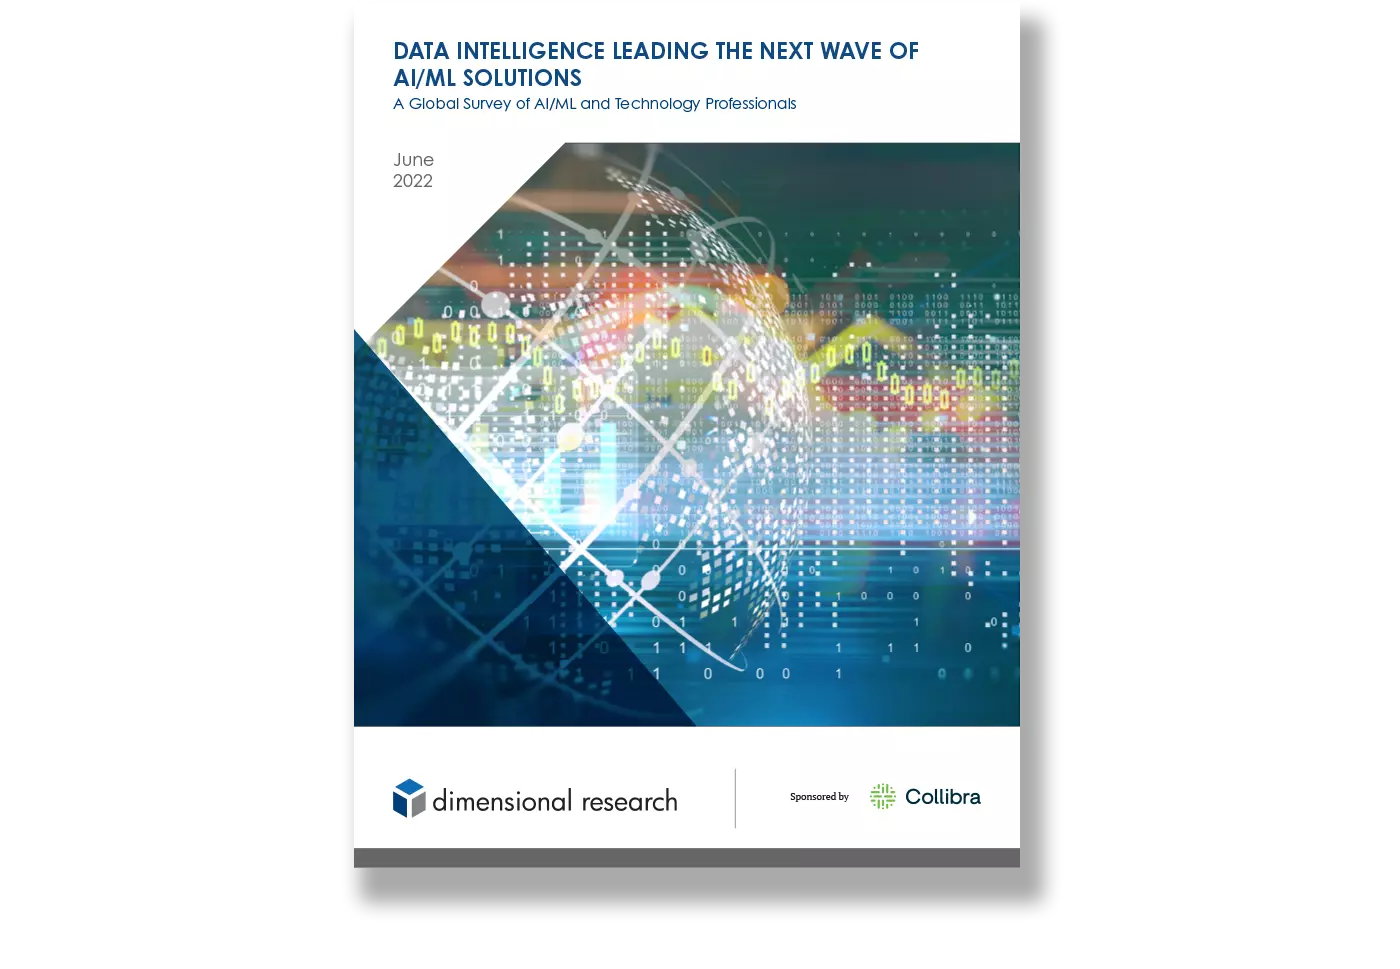 Data Intelligence Leading the Next Wave of AI/ML Solutions
A Global Survey of AI/ML and Technology Professionals
